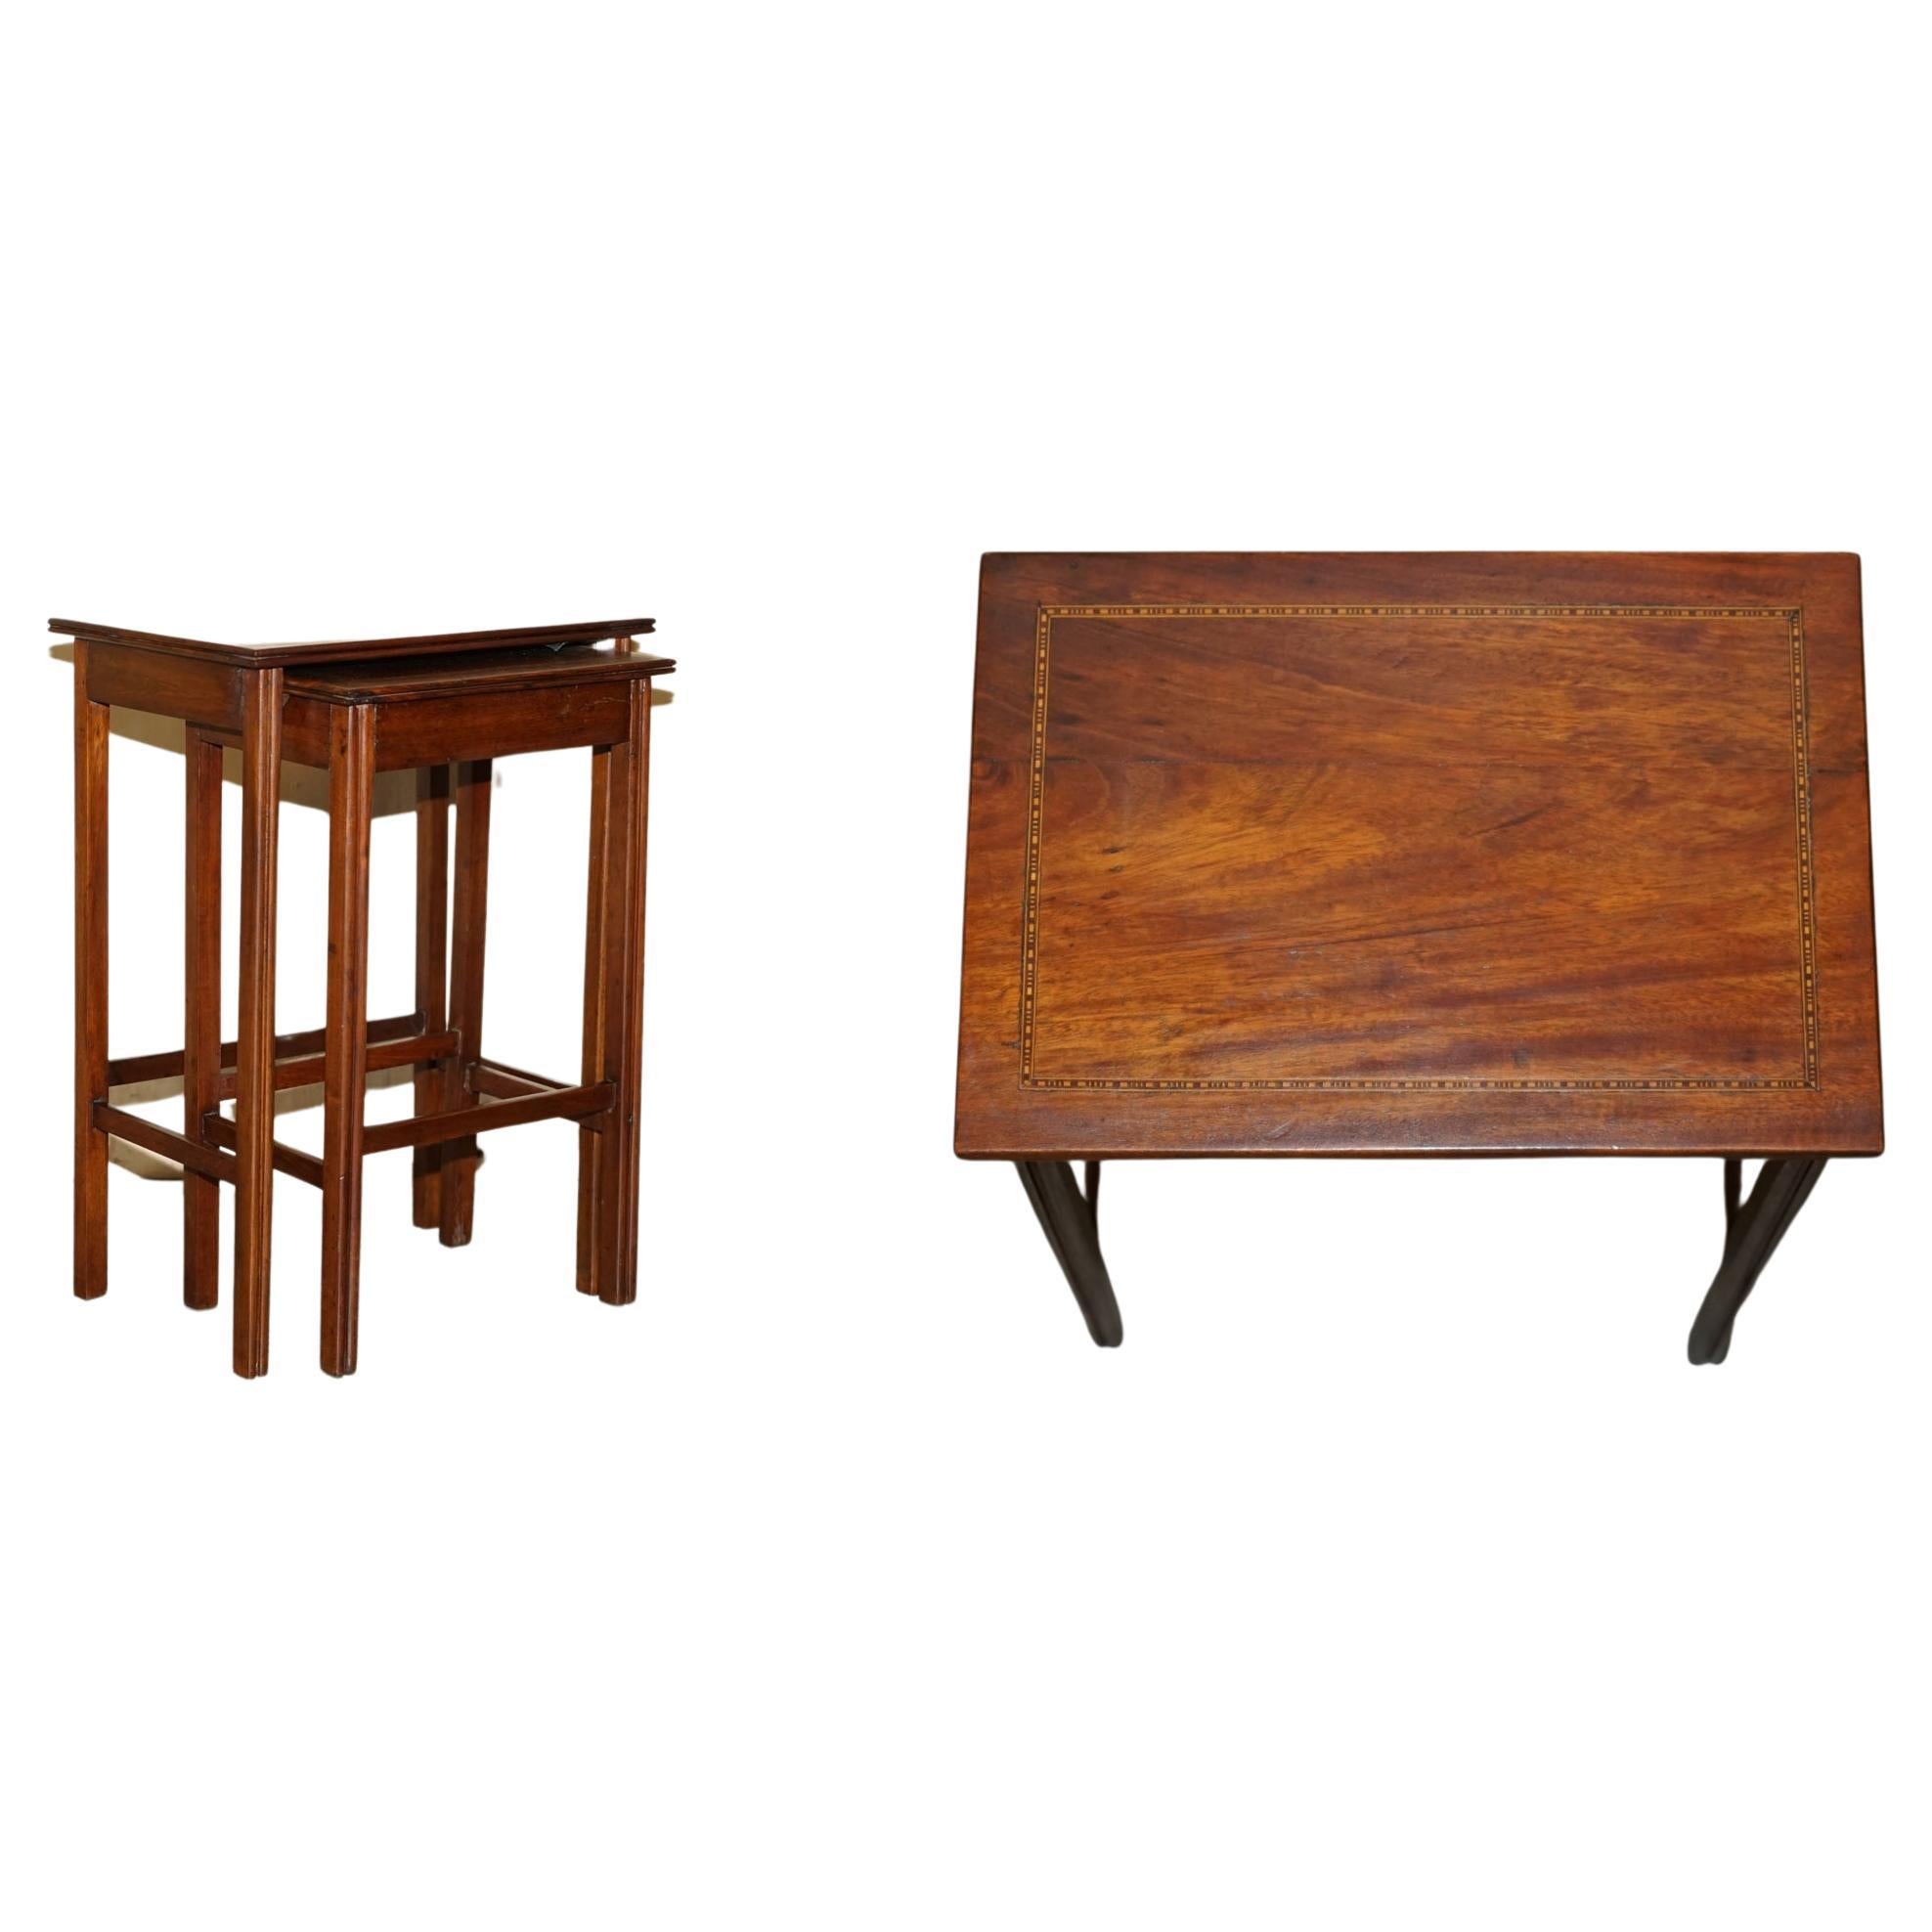 Vintage Nest of Two Flamed Hardwood Tables with Lovely Boxwood Inlaid Boarder's For Sale